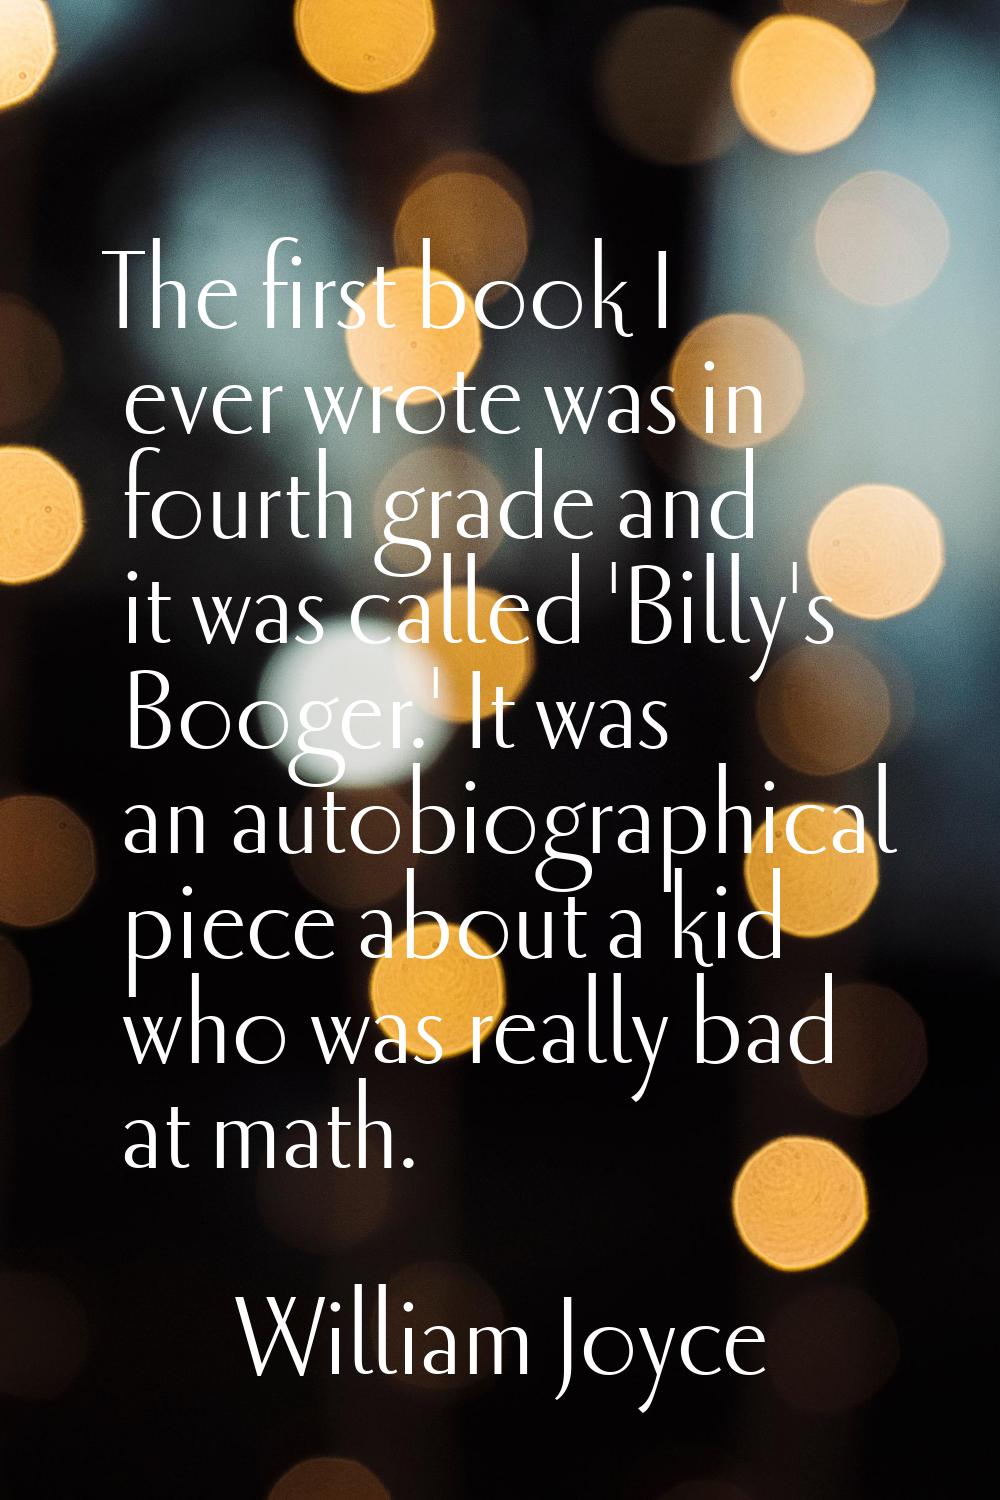 The first book I ever wrote was in fourth grade and it was called 'Billy's Booger.' It was an autob